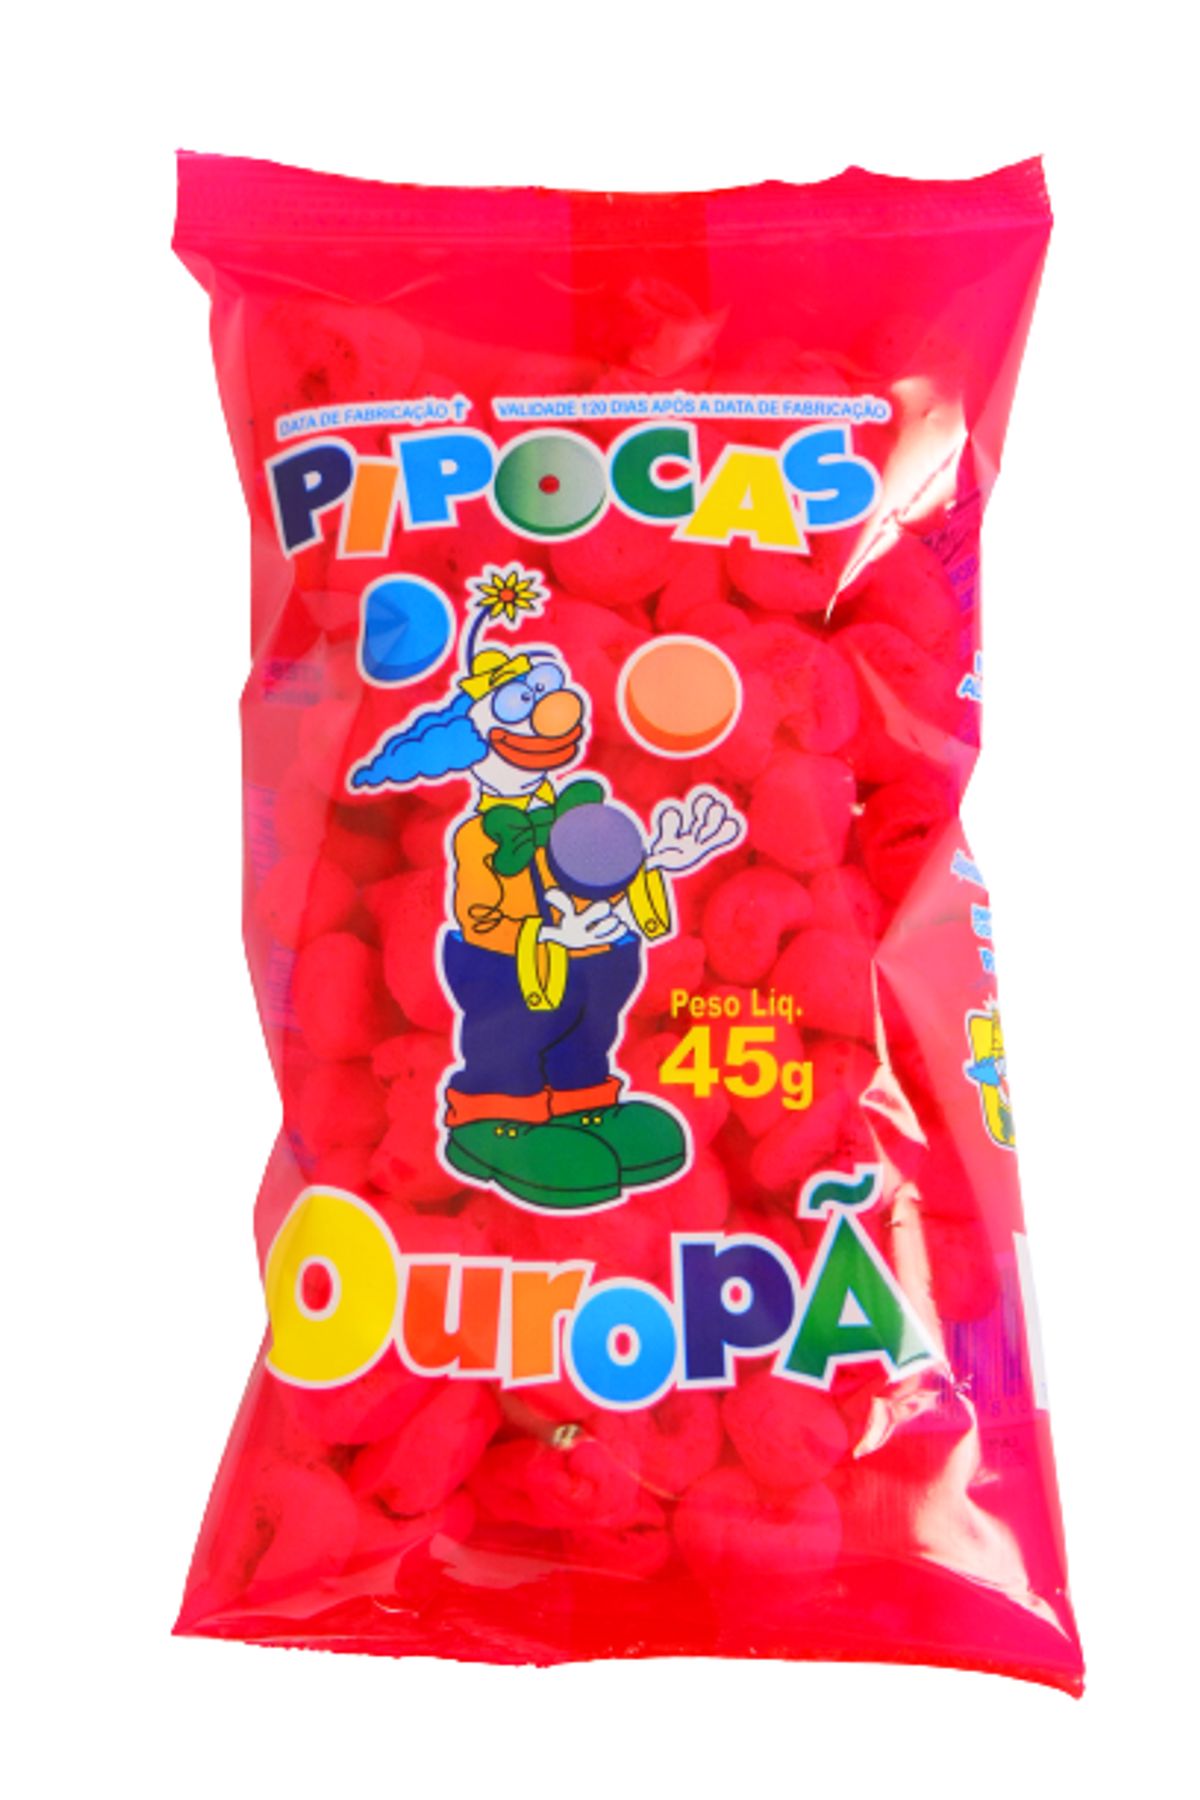 Pipoca Doce Ouropã 45g image number 0